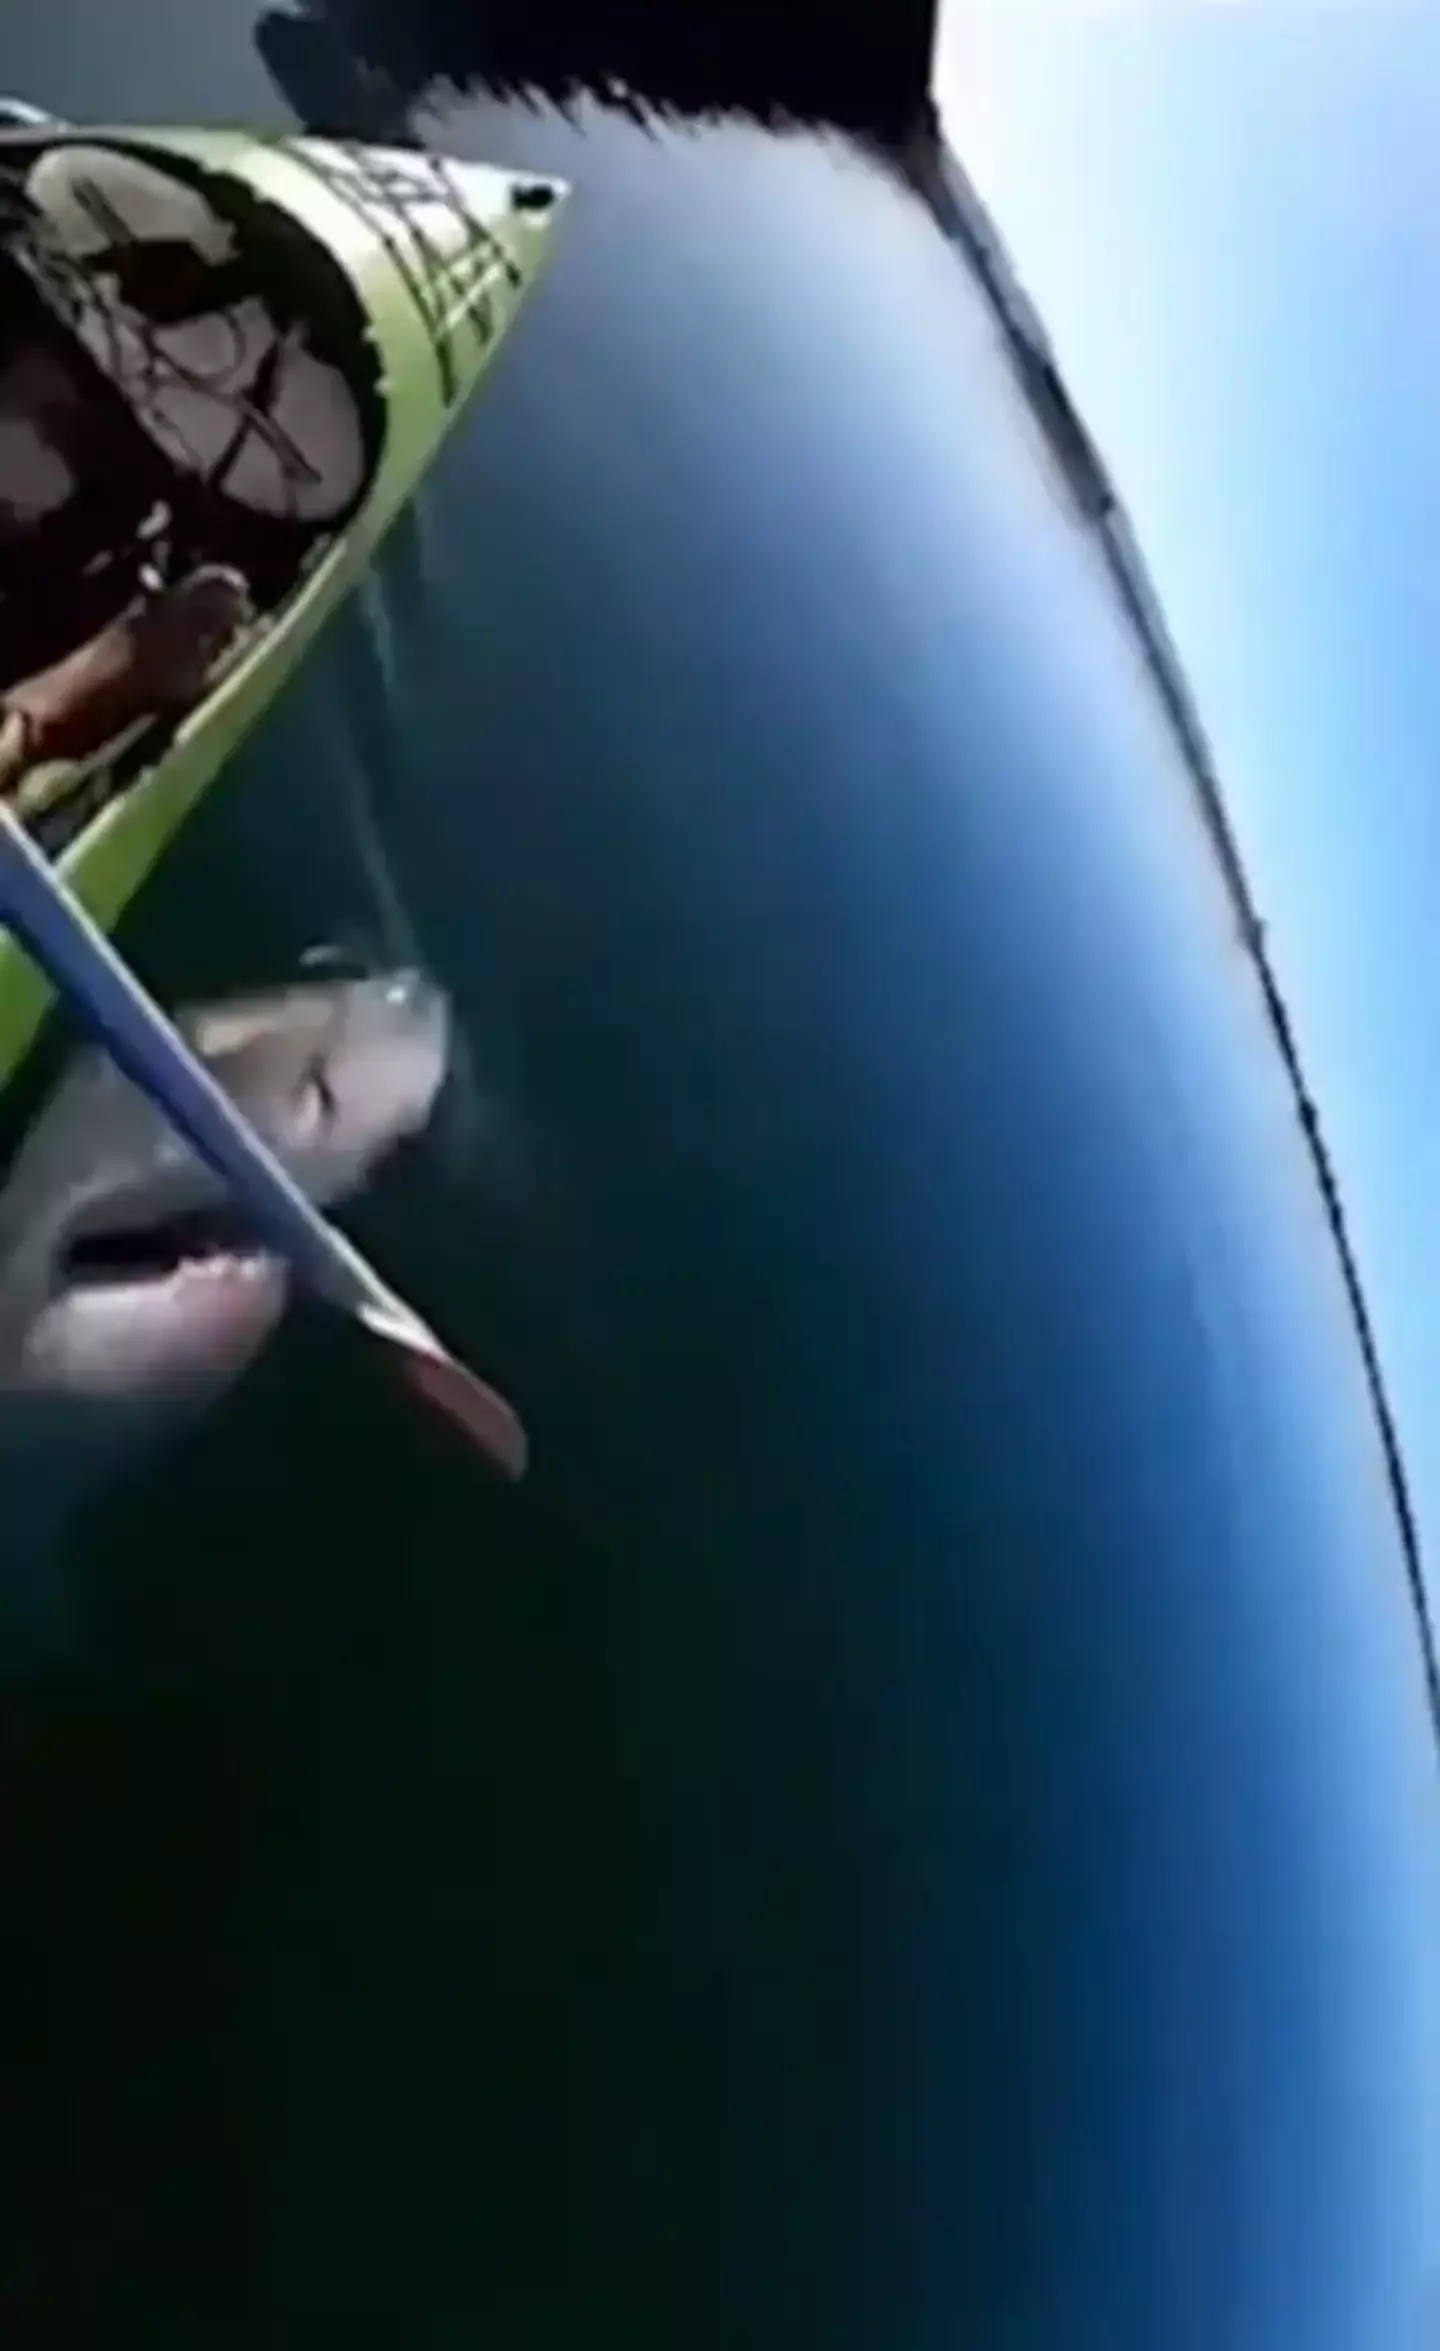 A kayaker has captured terrifying footage of great white shark trying to take a bite of his oar.